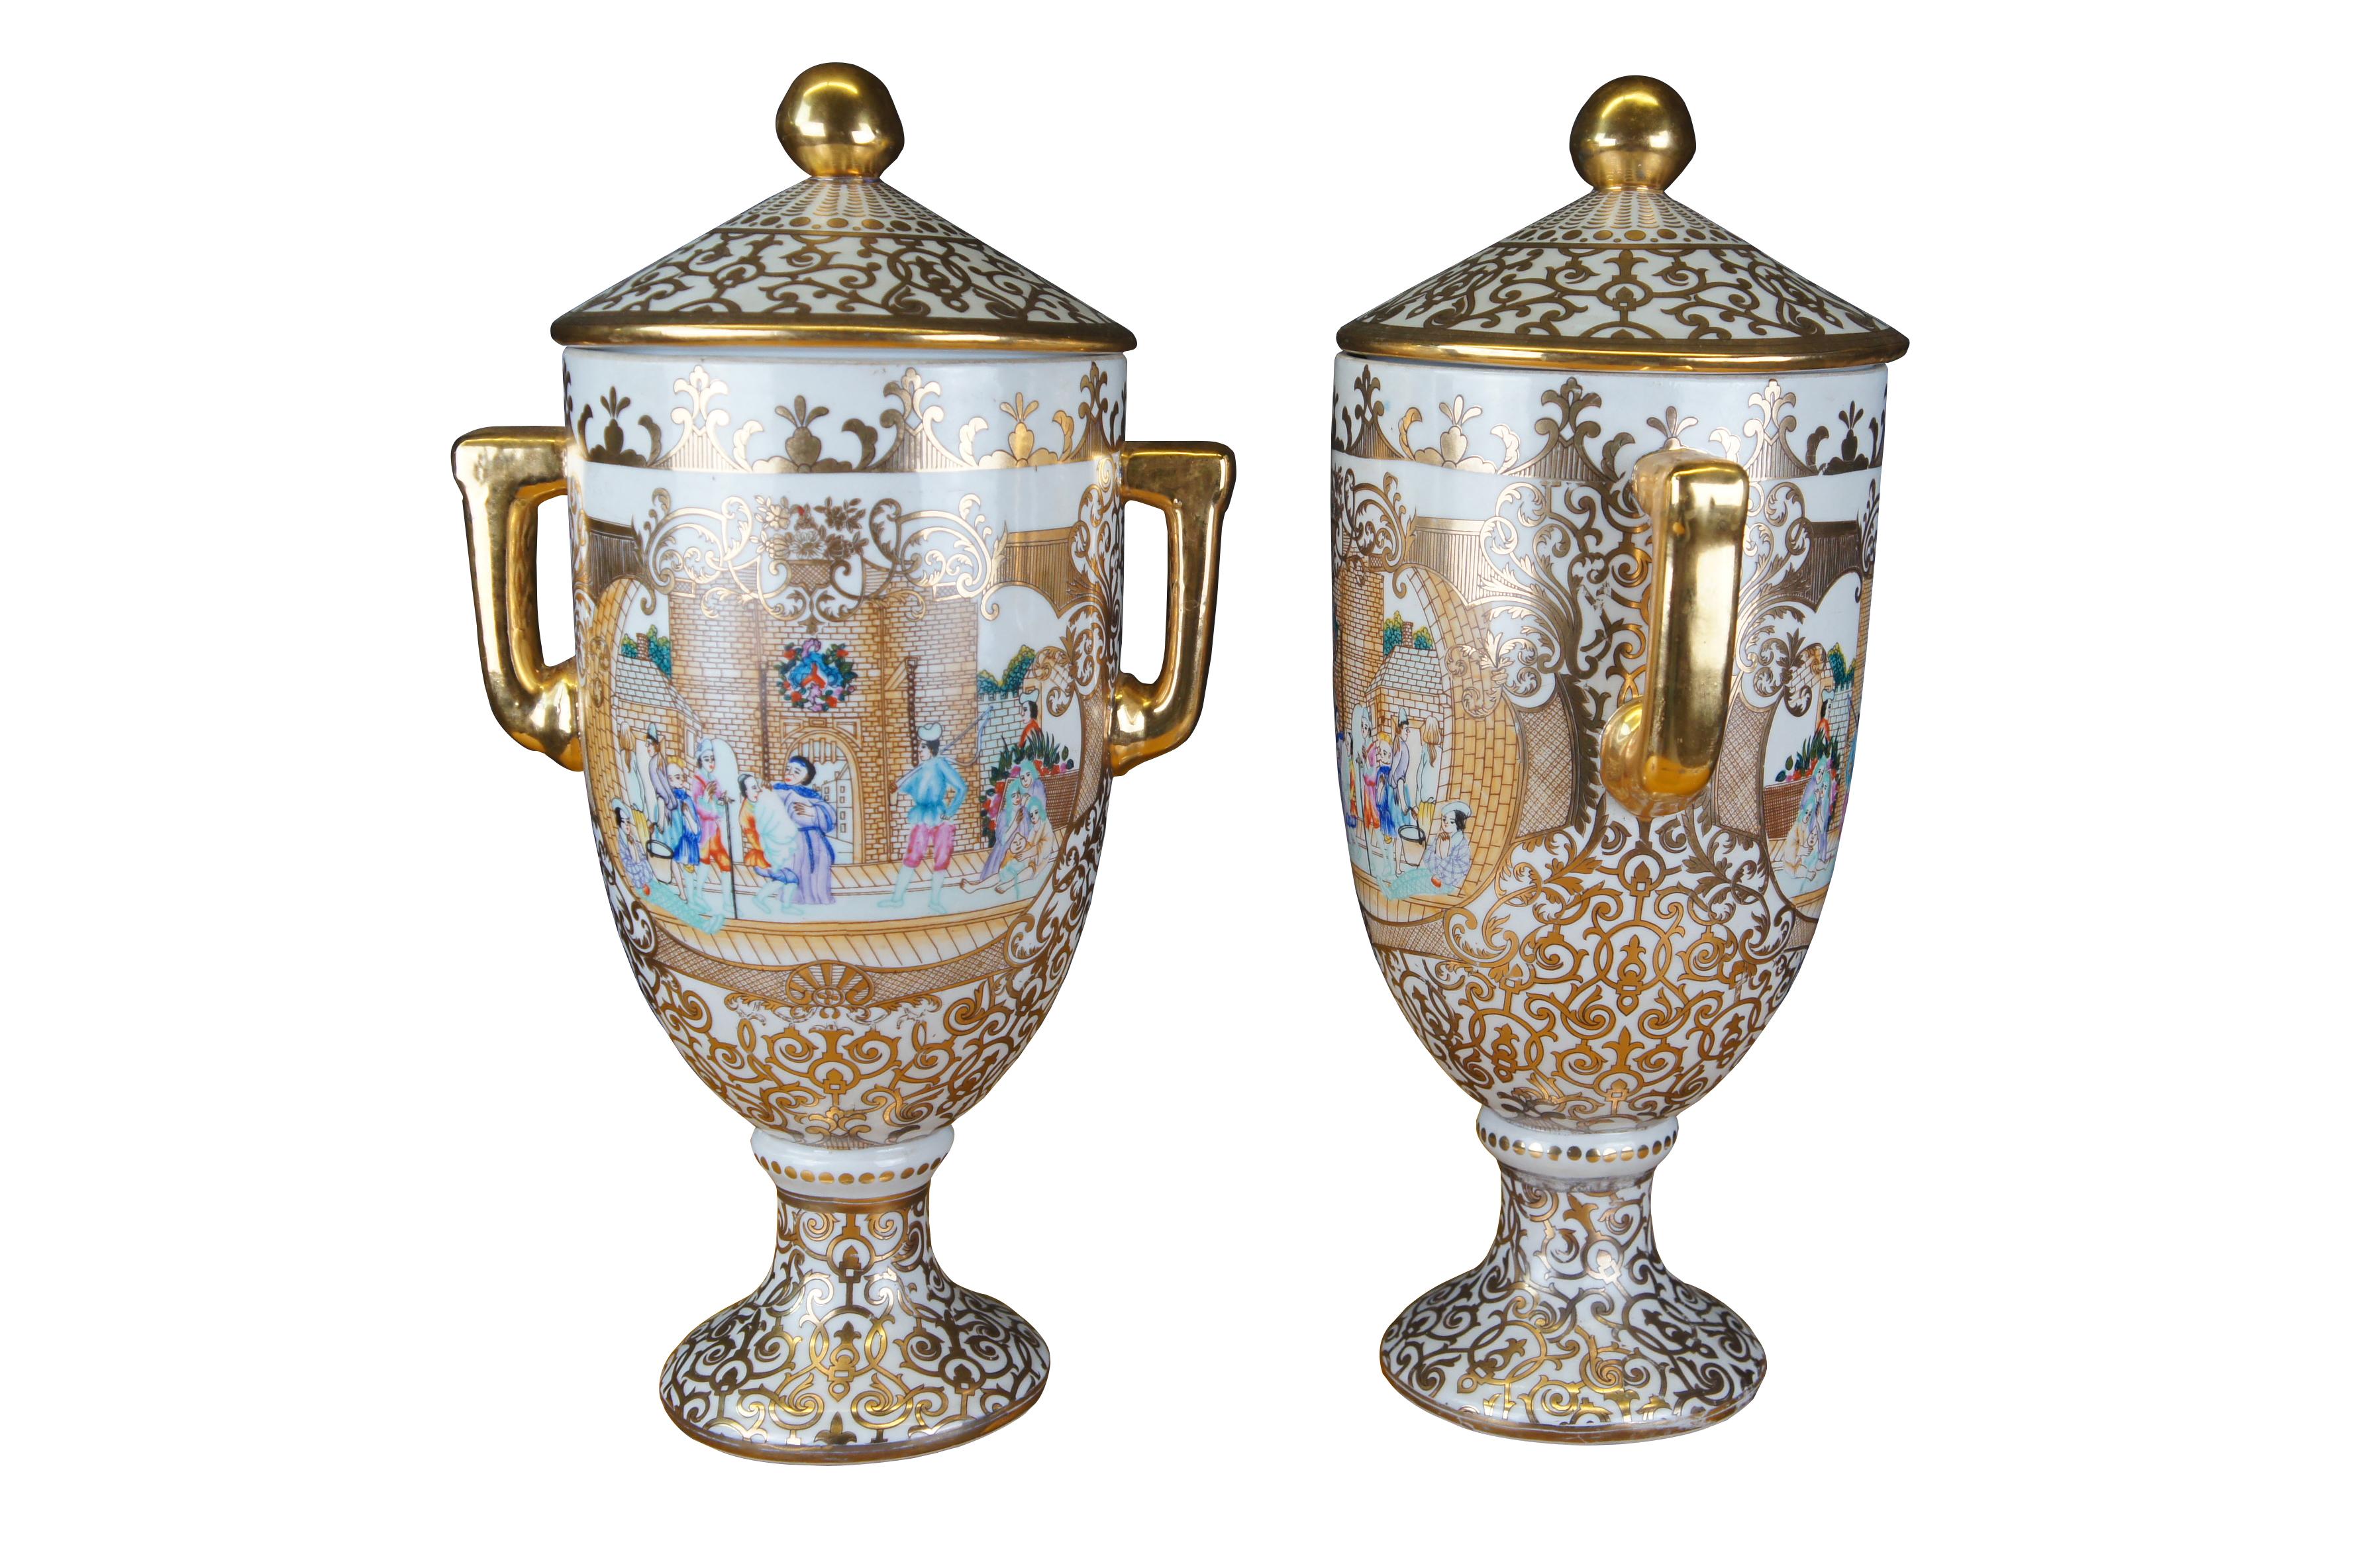 Beautiful pair of late 20th century Chinese porcelain buffet urns. Each features a white base with gold trim and central medieval castle landscape scene. Shaped in classical trophy urn form with handles and lid. Marked along underside.